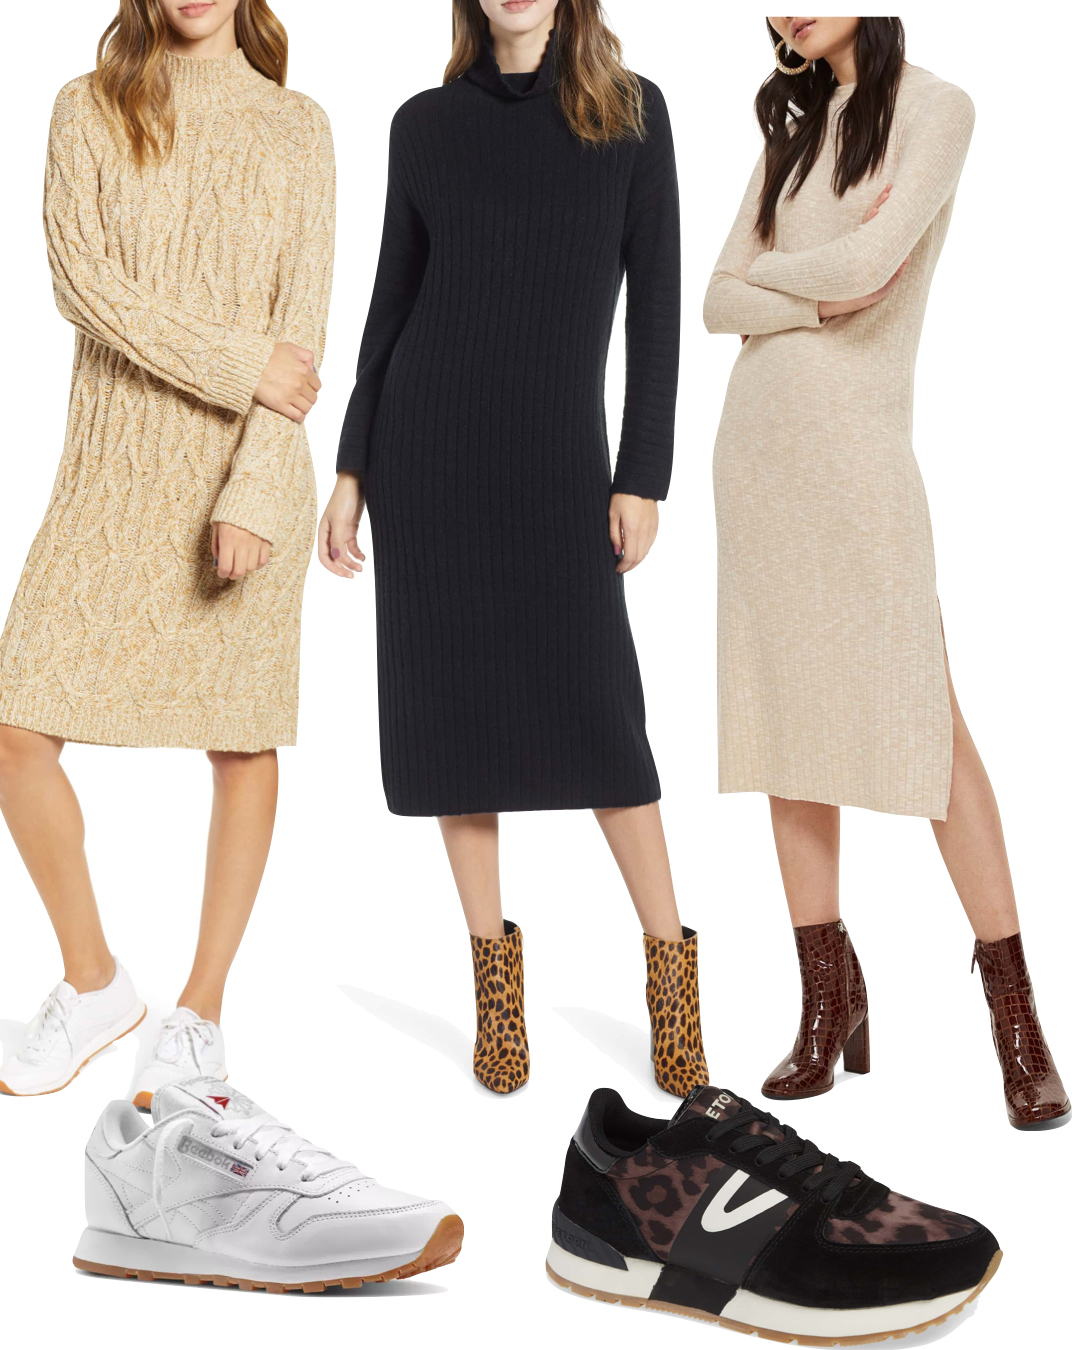 shoes to wear with a sweater dress